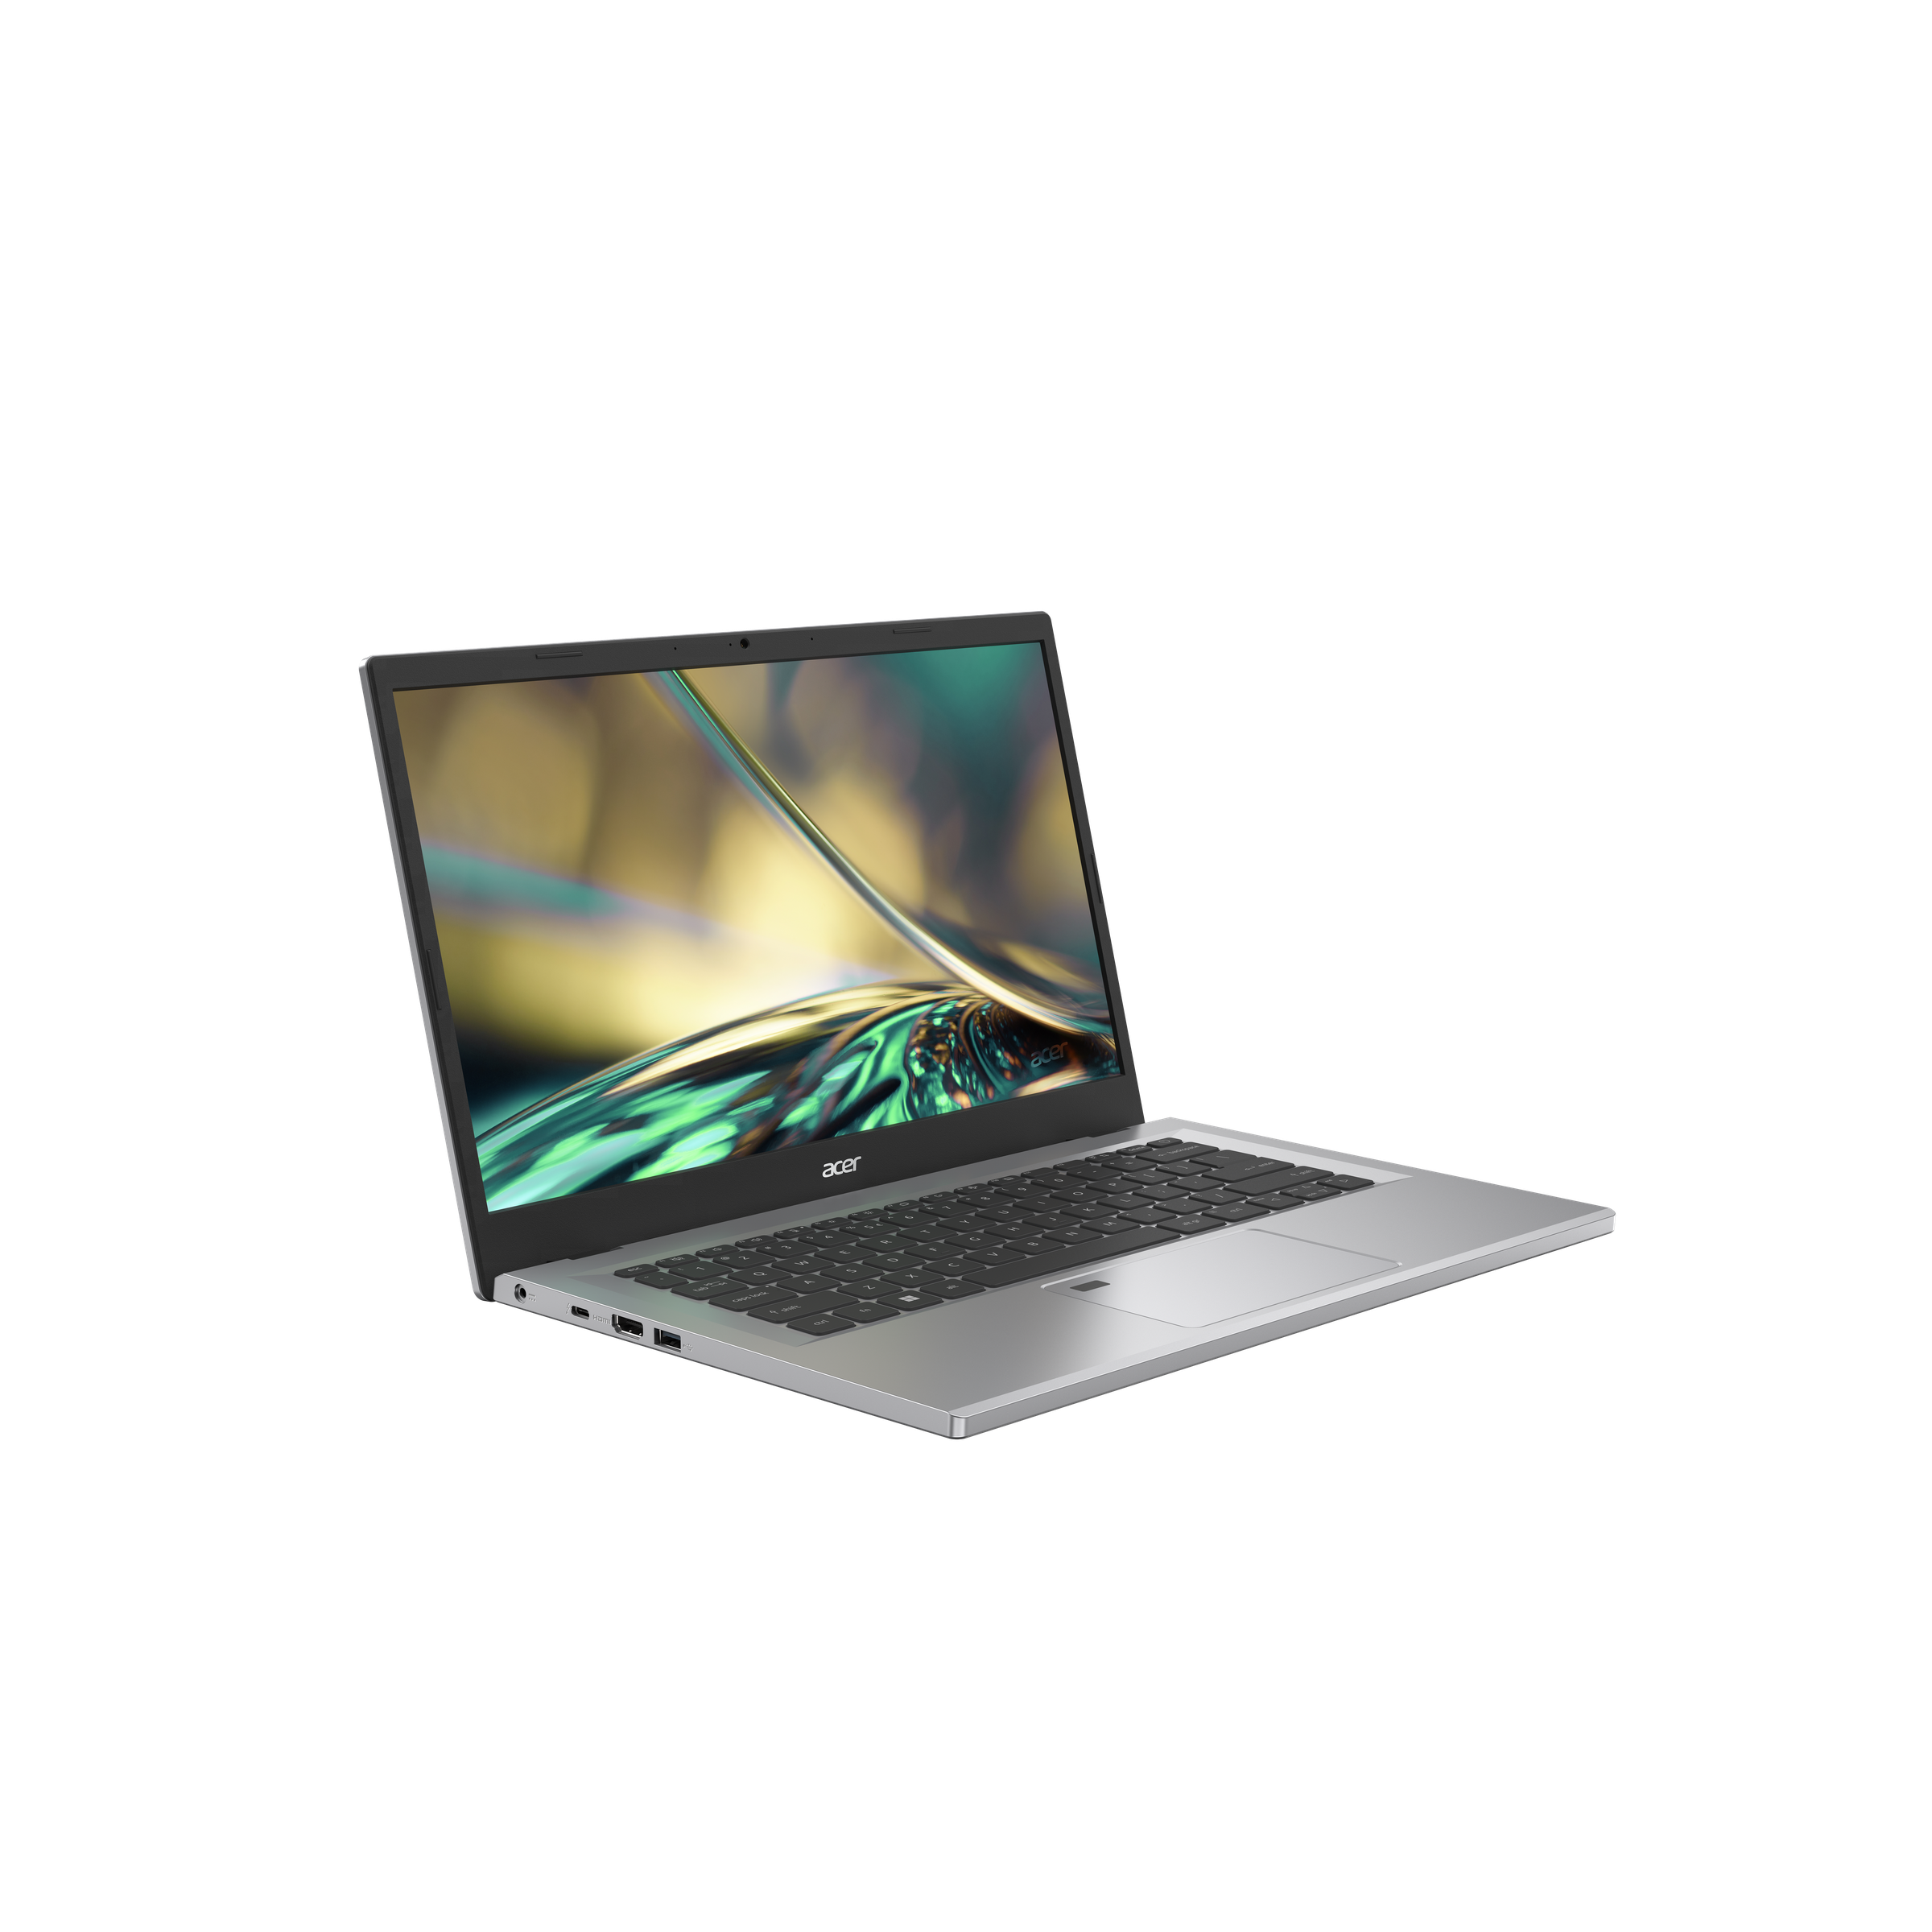 The Acer Aspire 3 open on a white background.